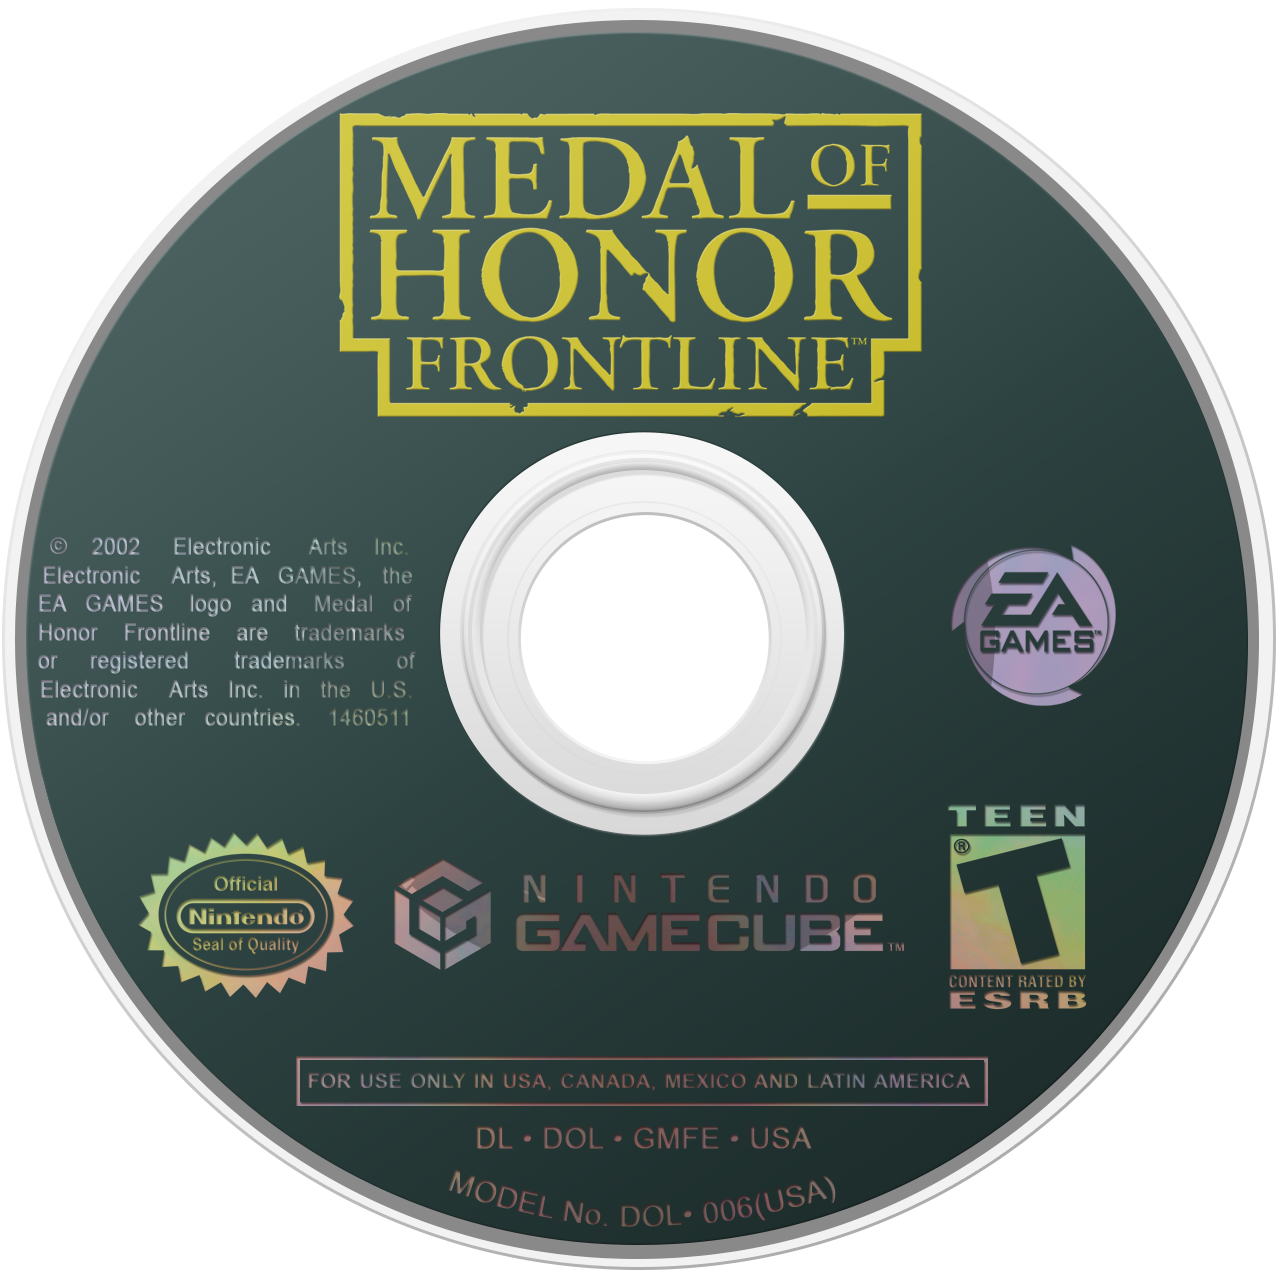 4 cheats available for medal of honor.